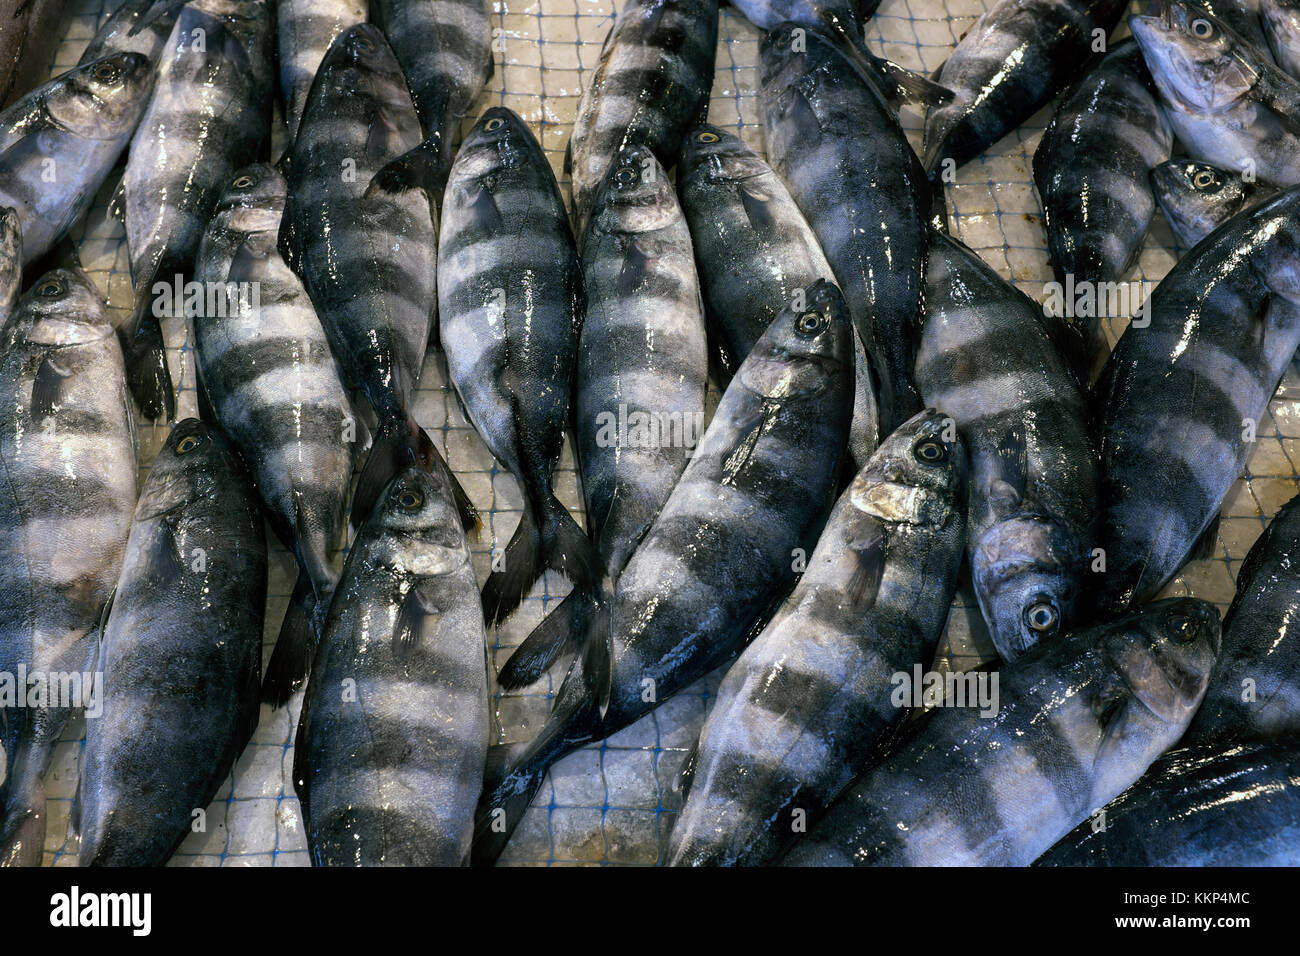 Pilot fish (Naucrates ductor) in a market, Ortygia, Sicily Stock Photo